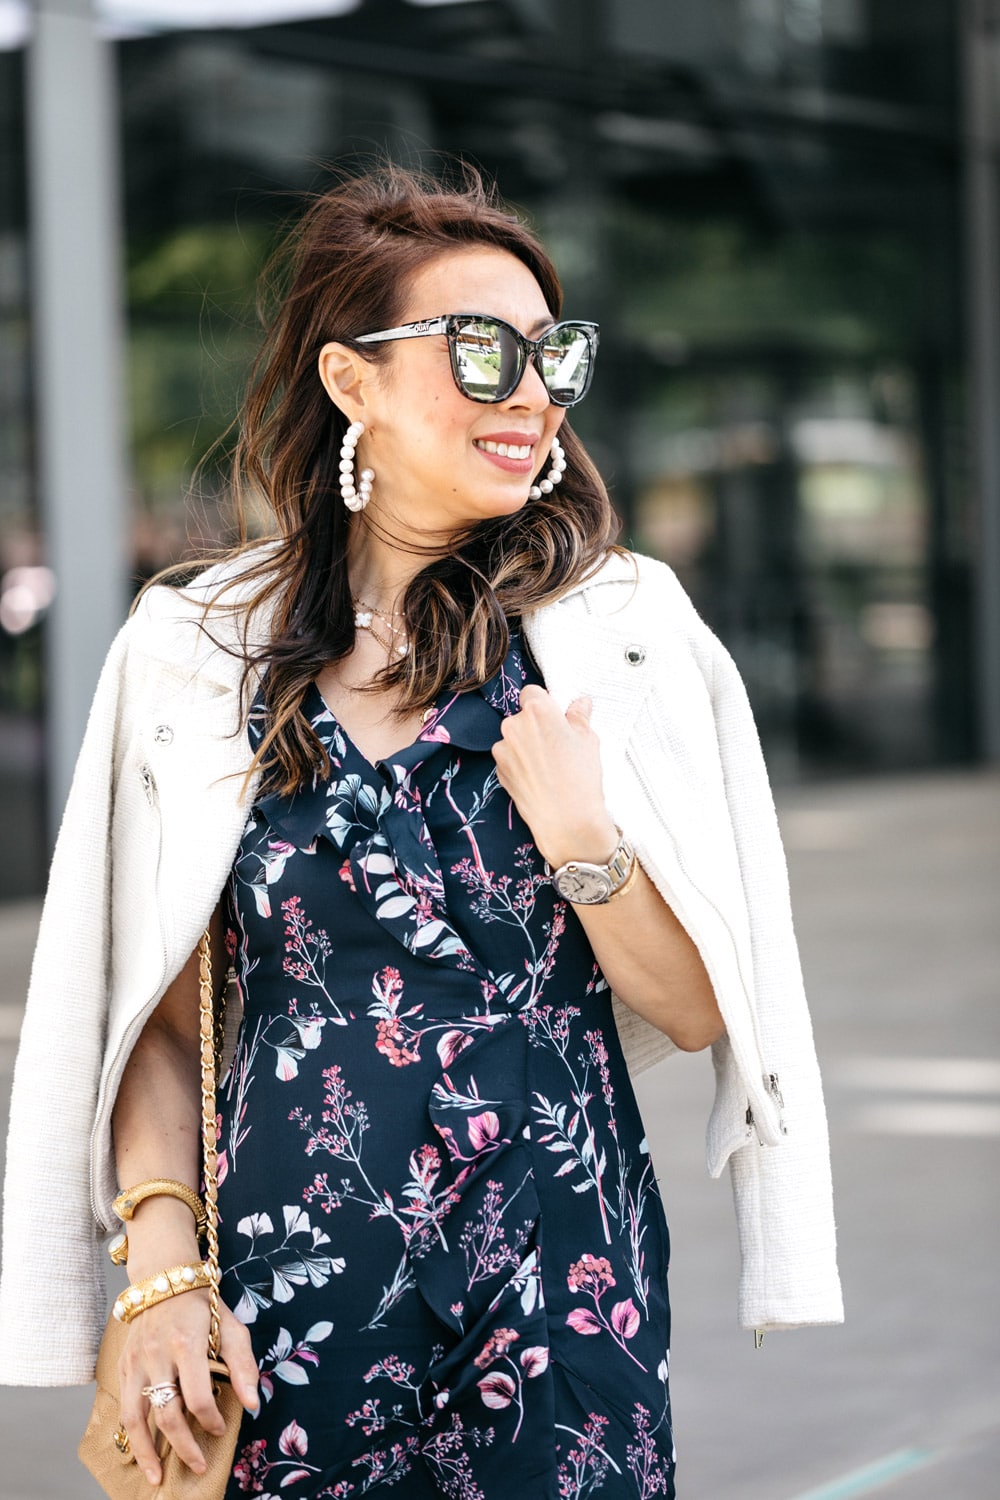 style of sam in lele sadoughi pearl hoop earrings and white tweed moto jacket over floral maxi dress